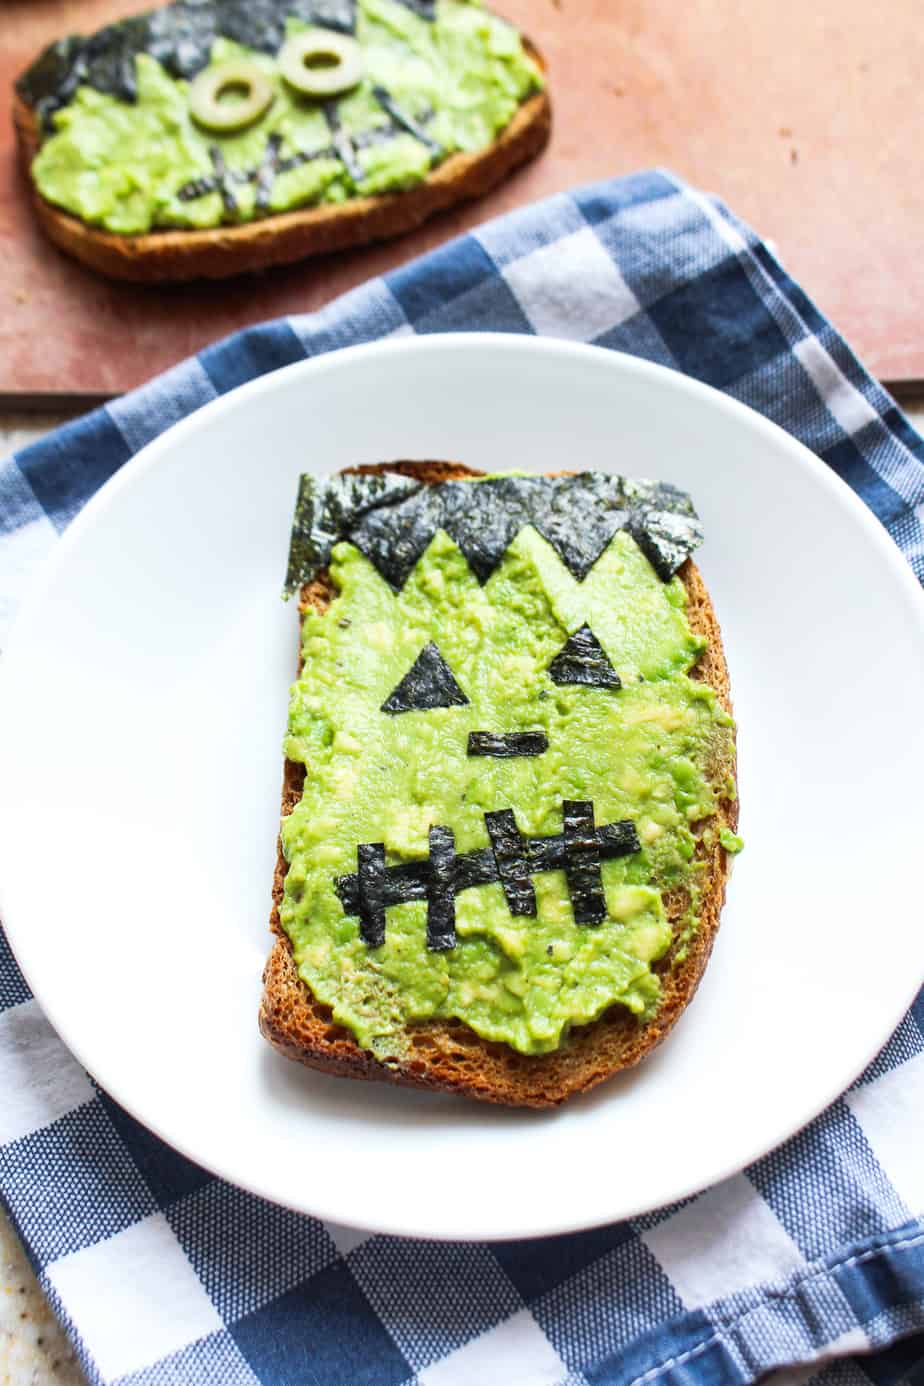 avocado toast decorated with nori to look like frankenstein